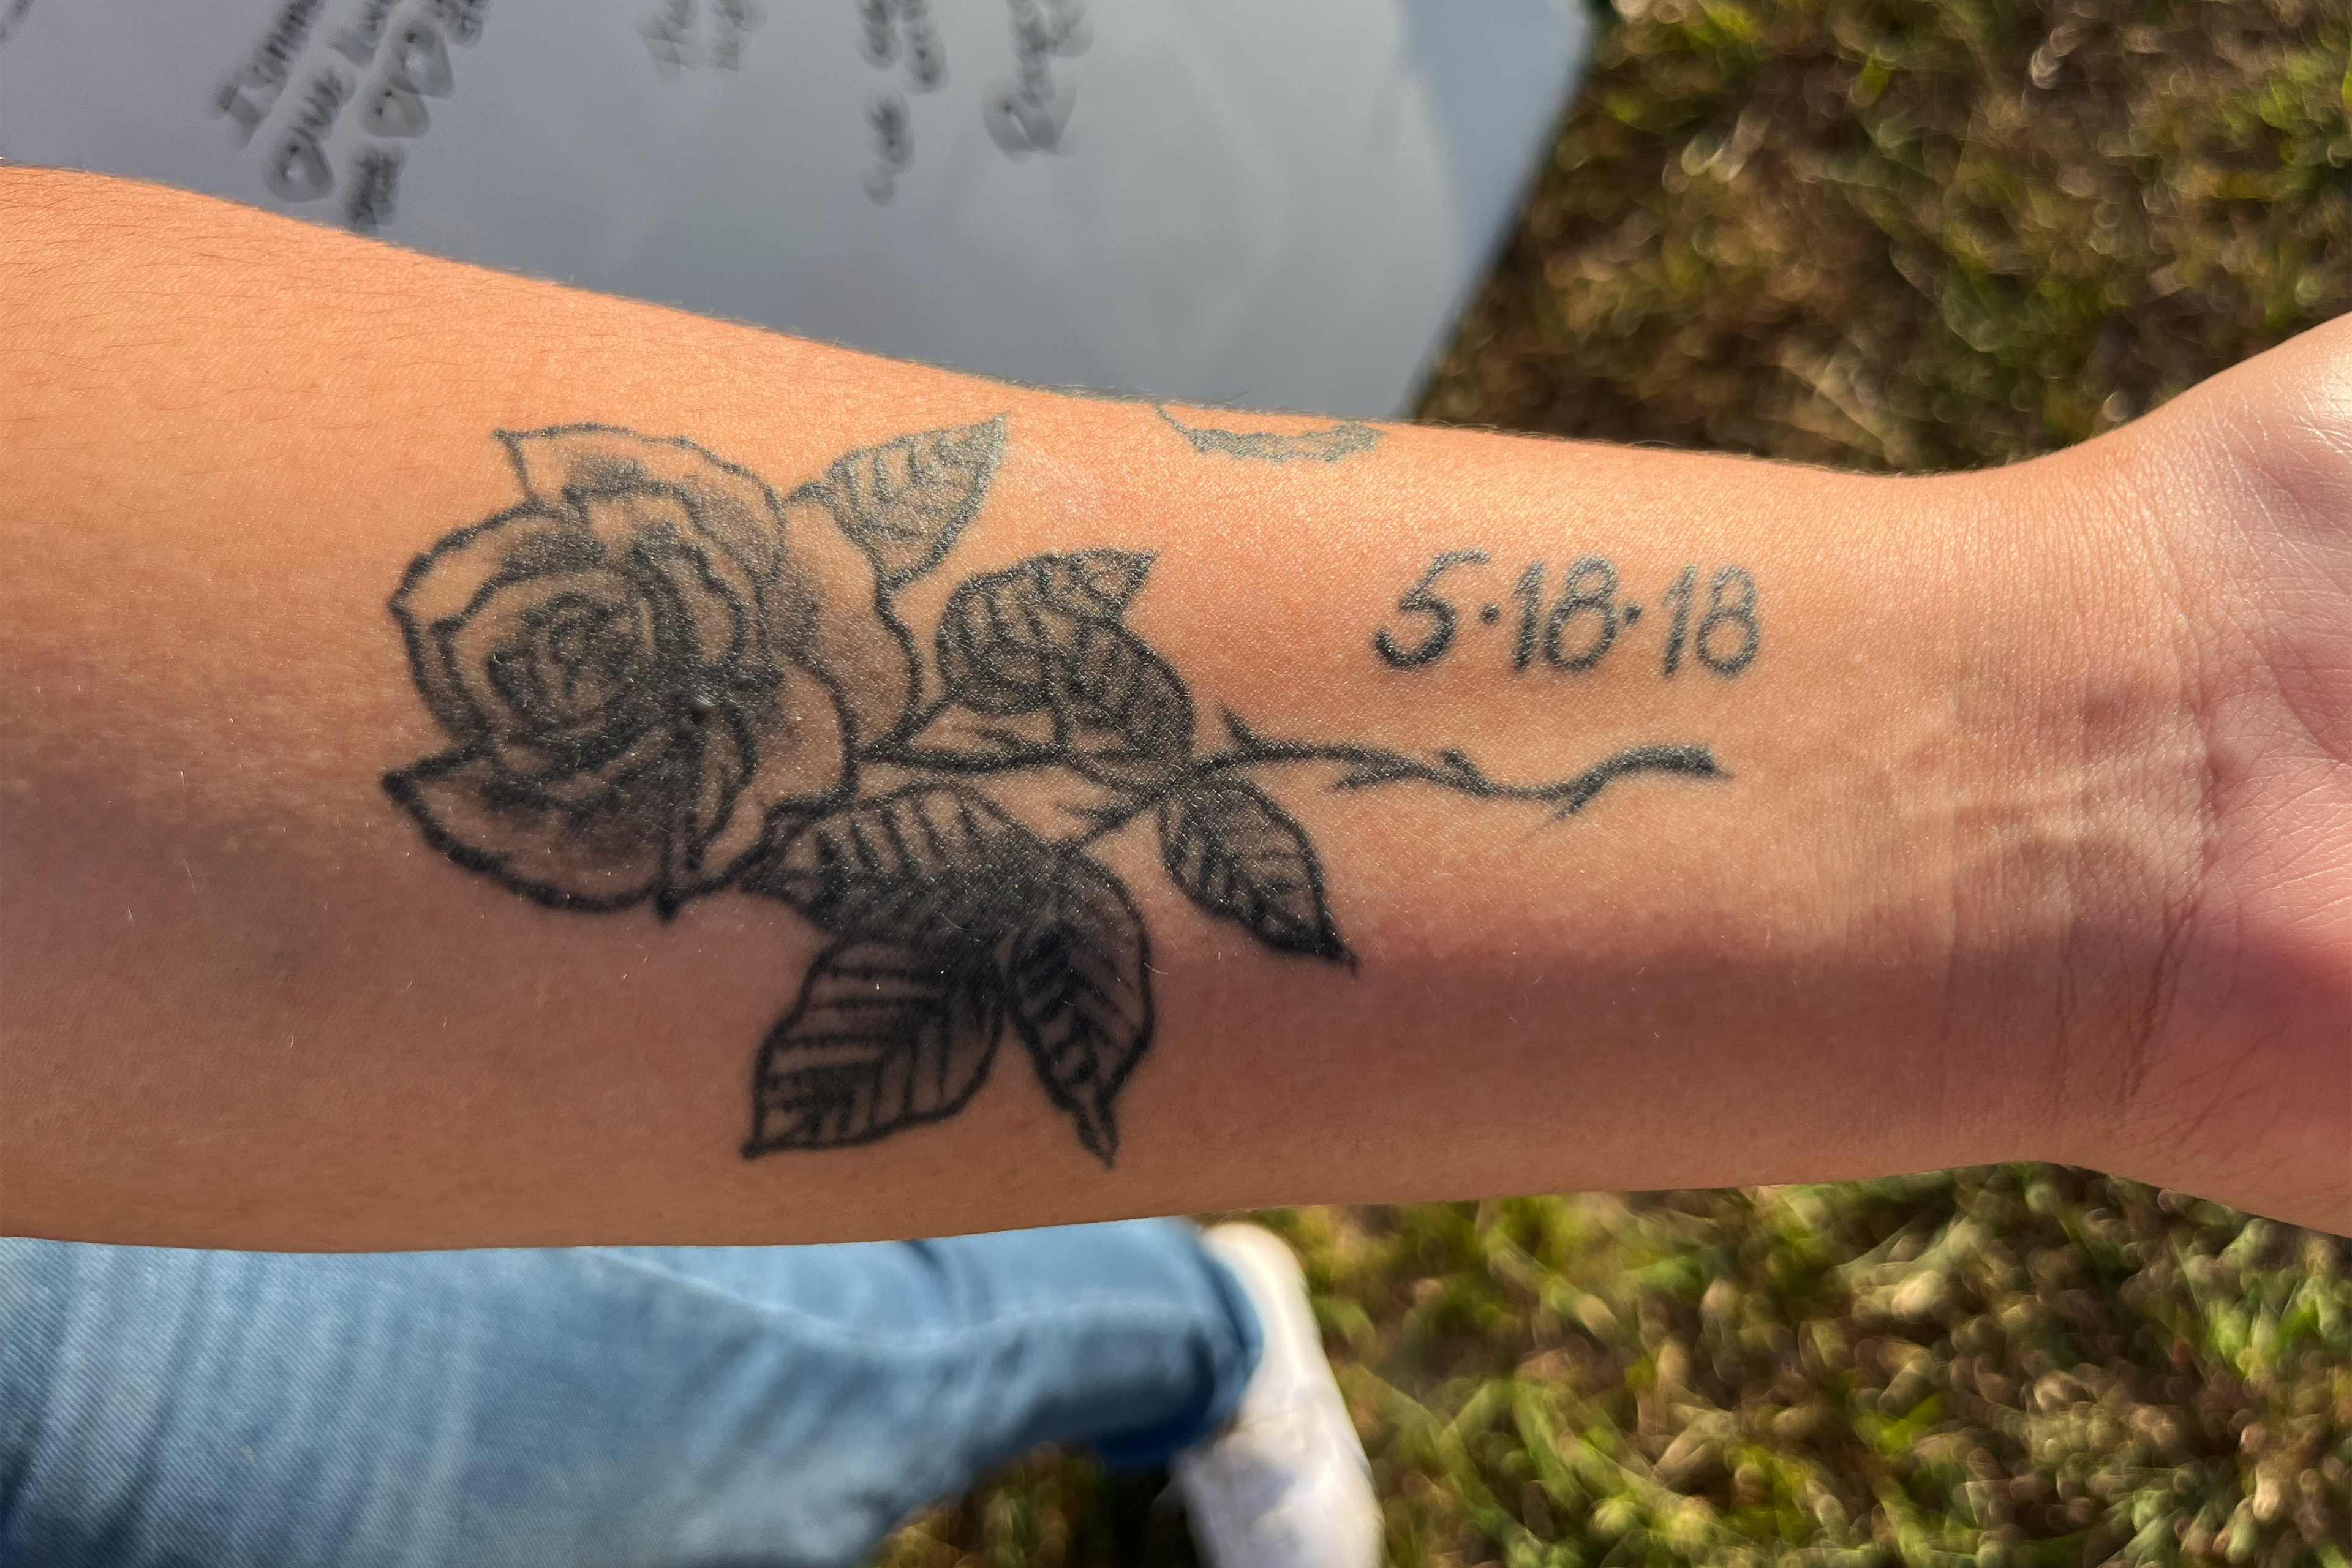 A photo of Reagan Gaona's wrist shows a black and gray rose tattoo with a date next to it: May 18, 2018.